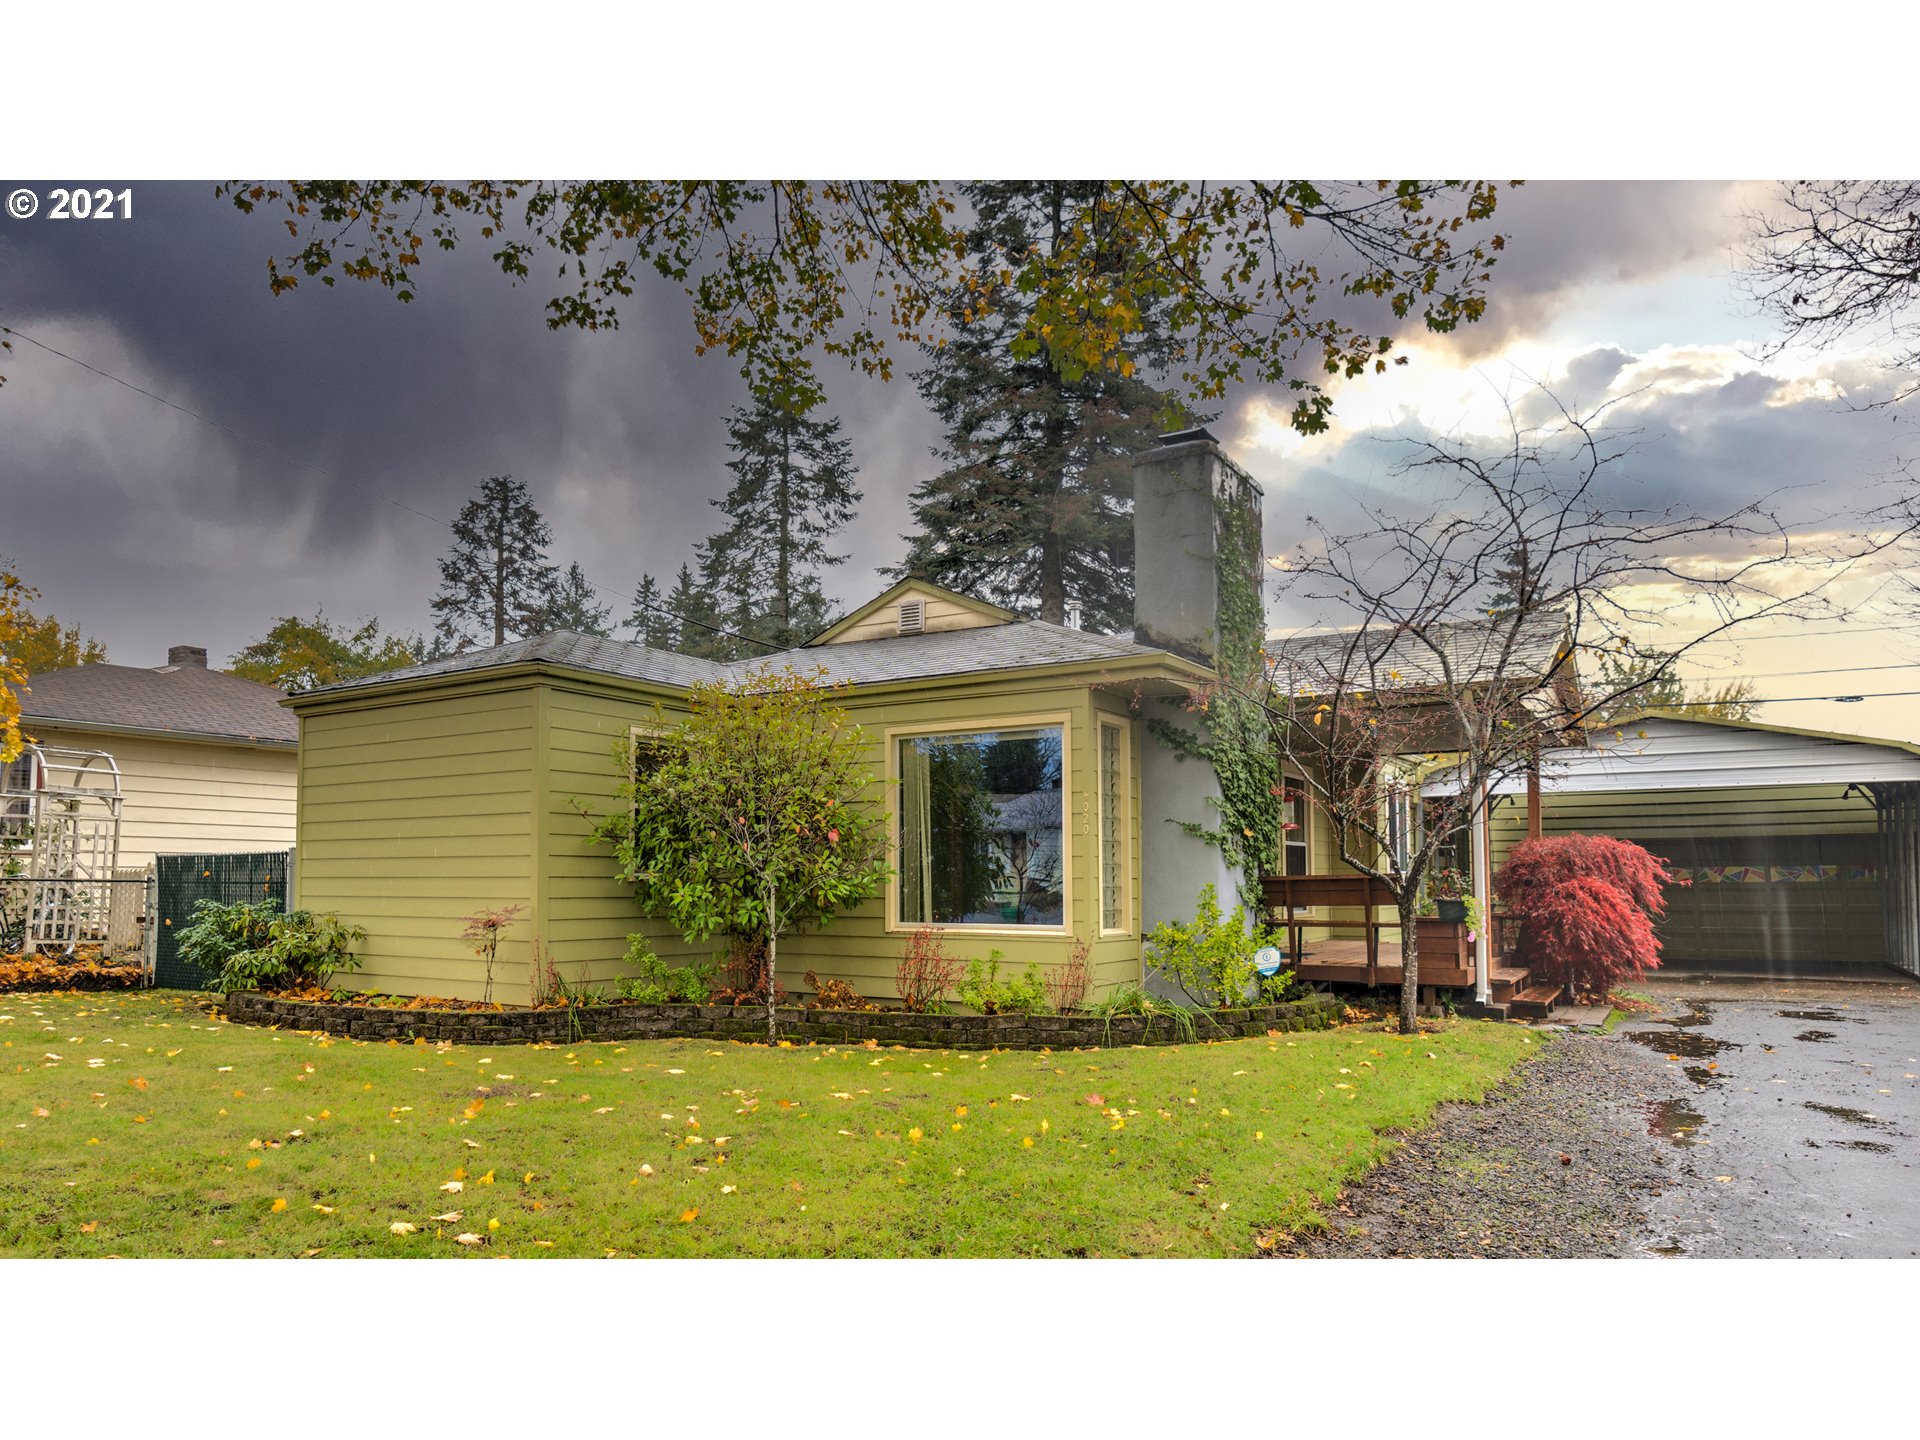 4020 SE 114TH AVE (1 of 32)